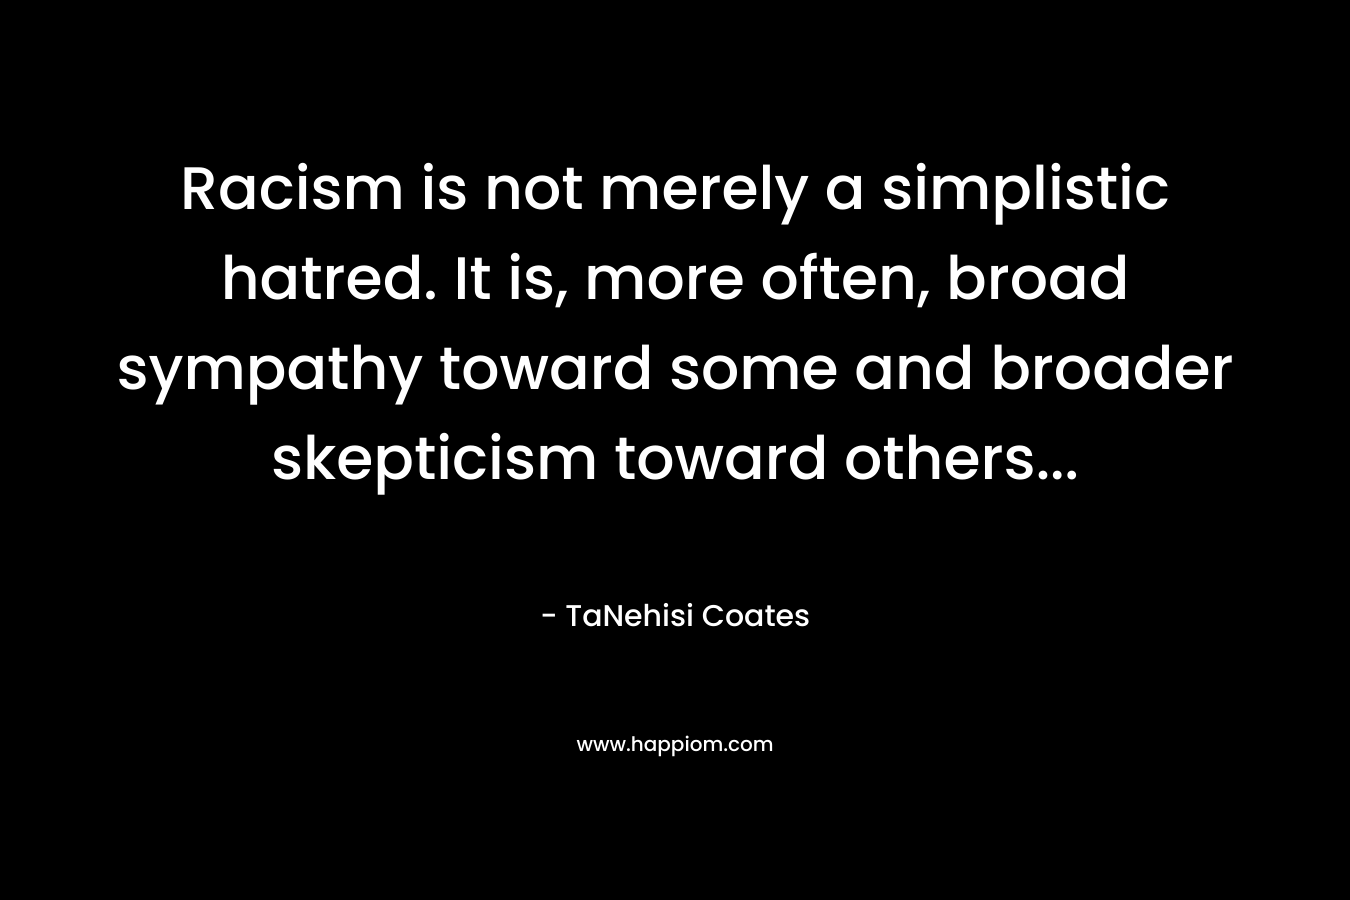 Racism is not merely a simplistic hatred. It is, more often, broad sympathy toward some and broader skepticism toward others...